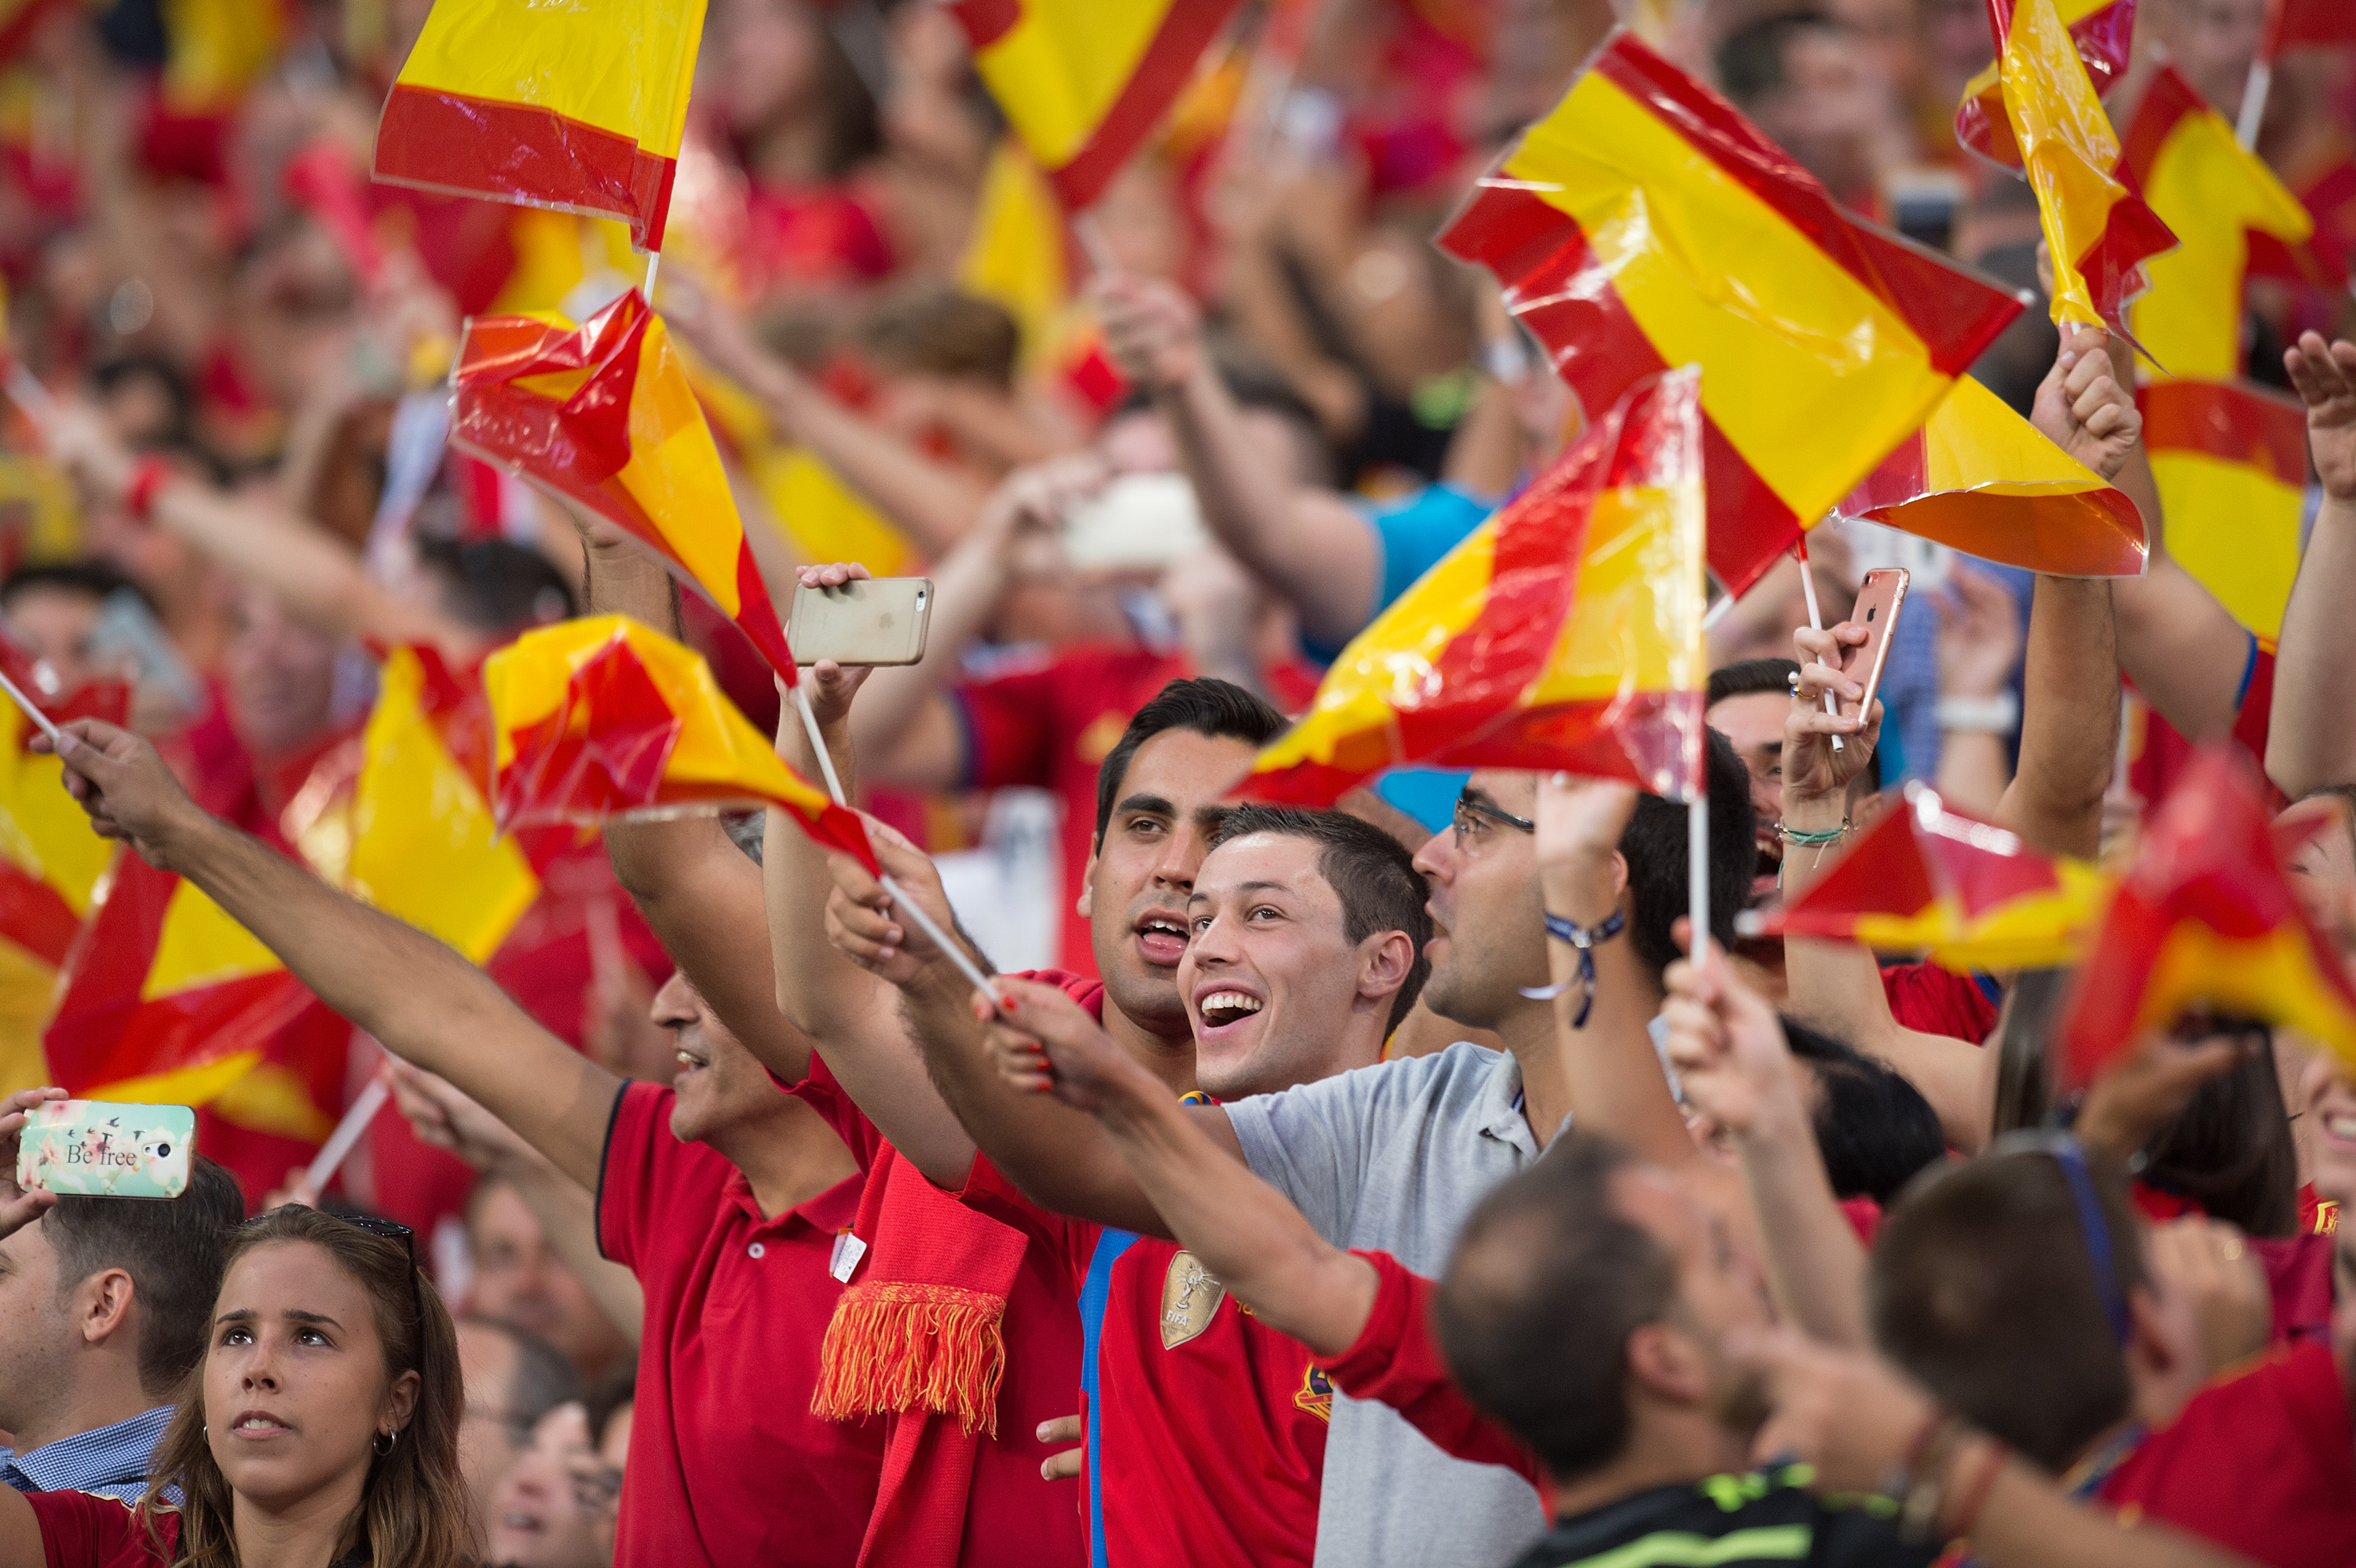 MADRID, SPAIN - SEPTEMBER 02: Spain fans cheer their team during the FIFA 2018 World Cup Qualifier between Spain and Italy at Estadio Santiago Bernabeu on September 2, 2017 in Madrid, . (Photo by Denis Doyle/Getty Images)